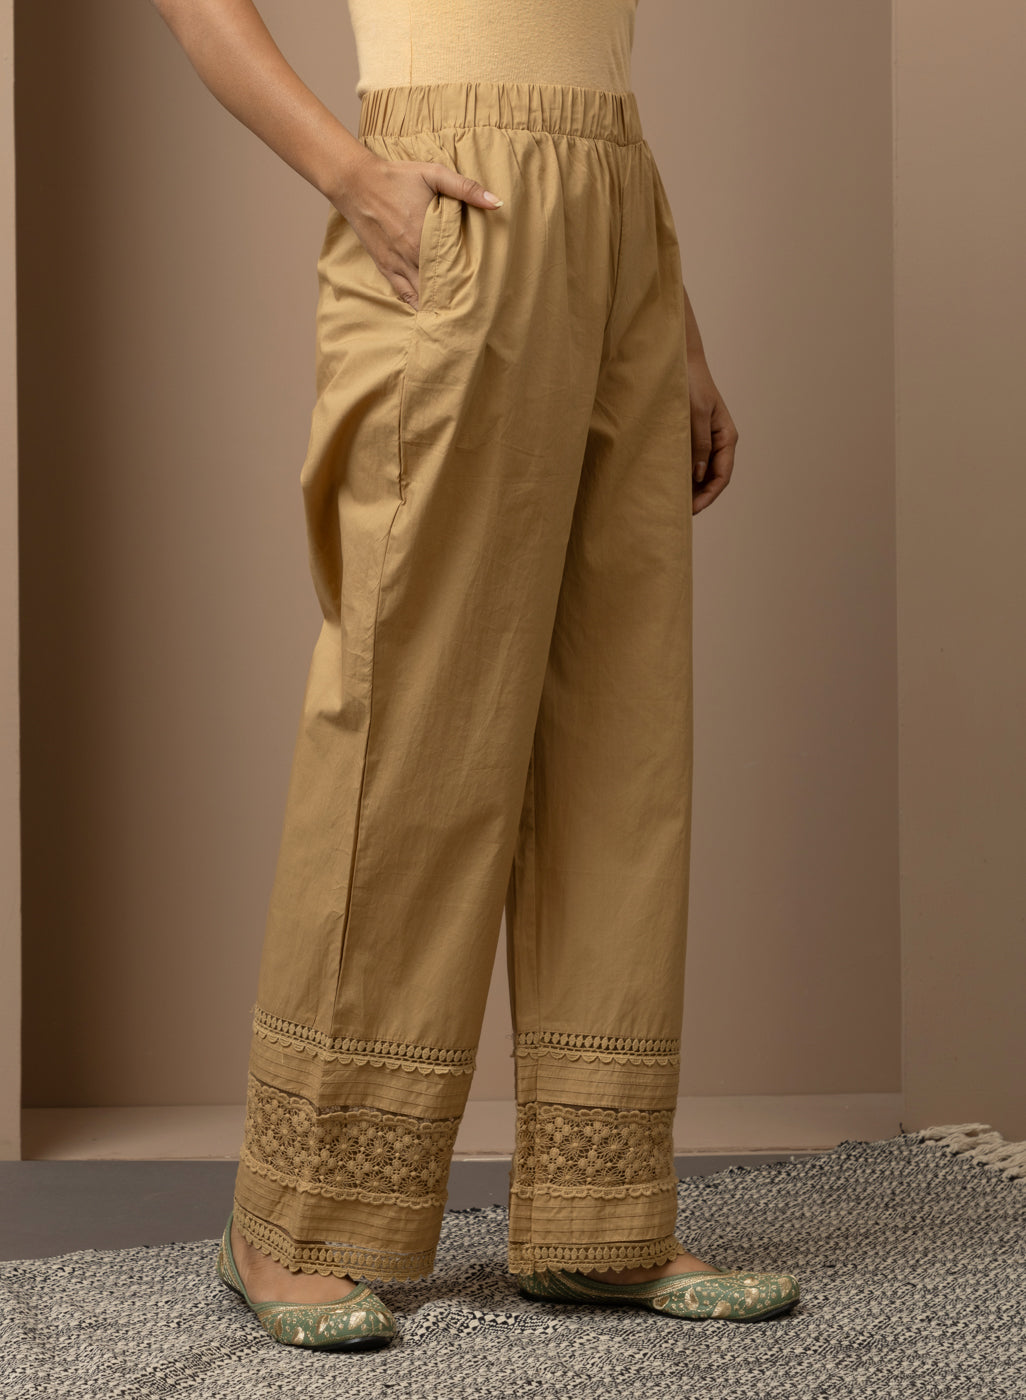 Buy Blue & Golden Silk Kurta with Pants for Women at Amazon.in